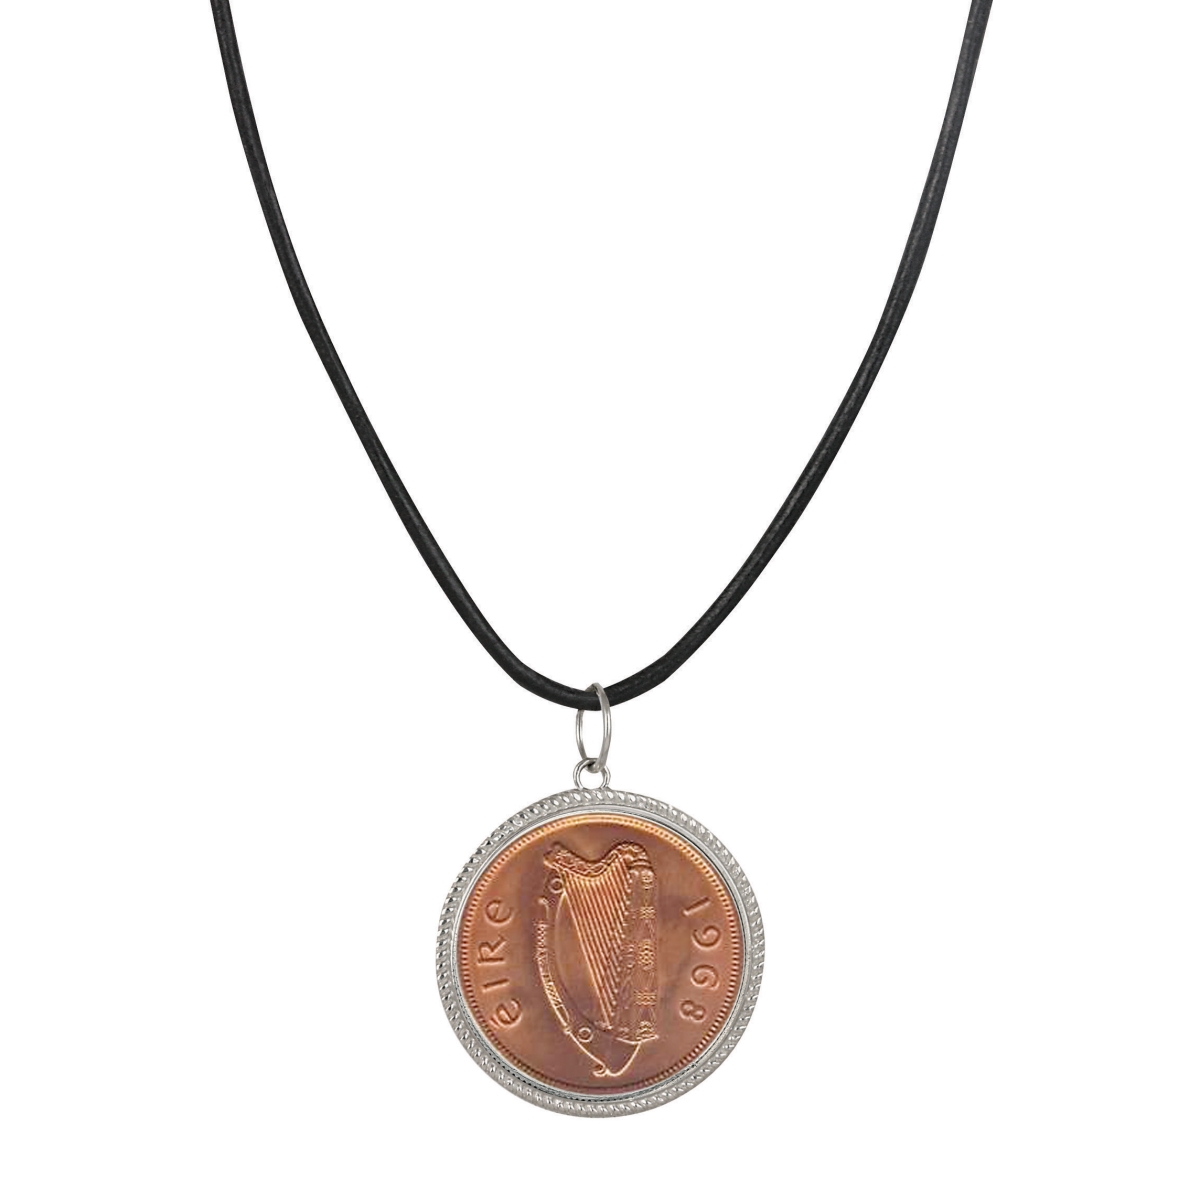 Picture of American Coin Treasures 16367 Large Irish Penny Pendant with Leather Cord for Men